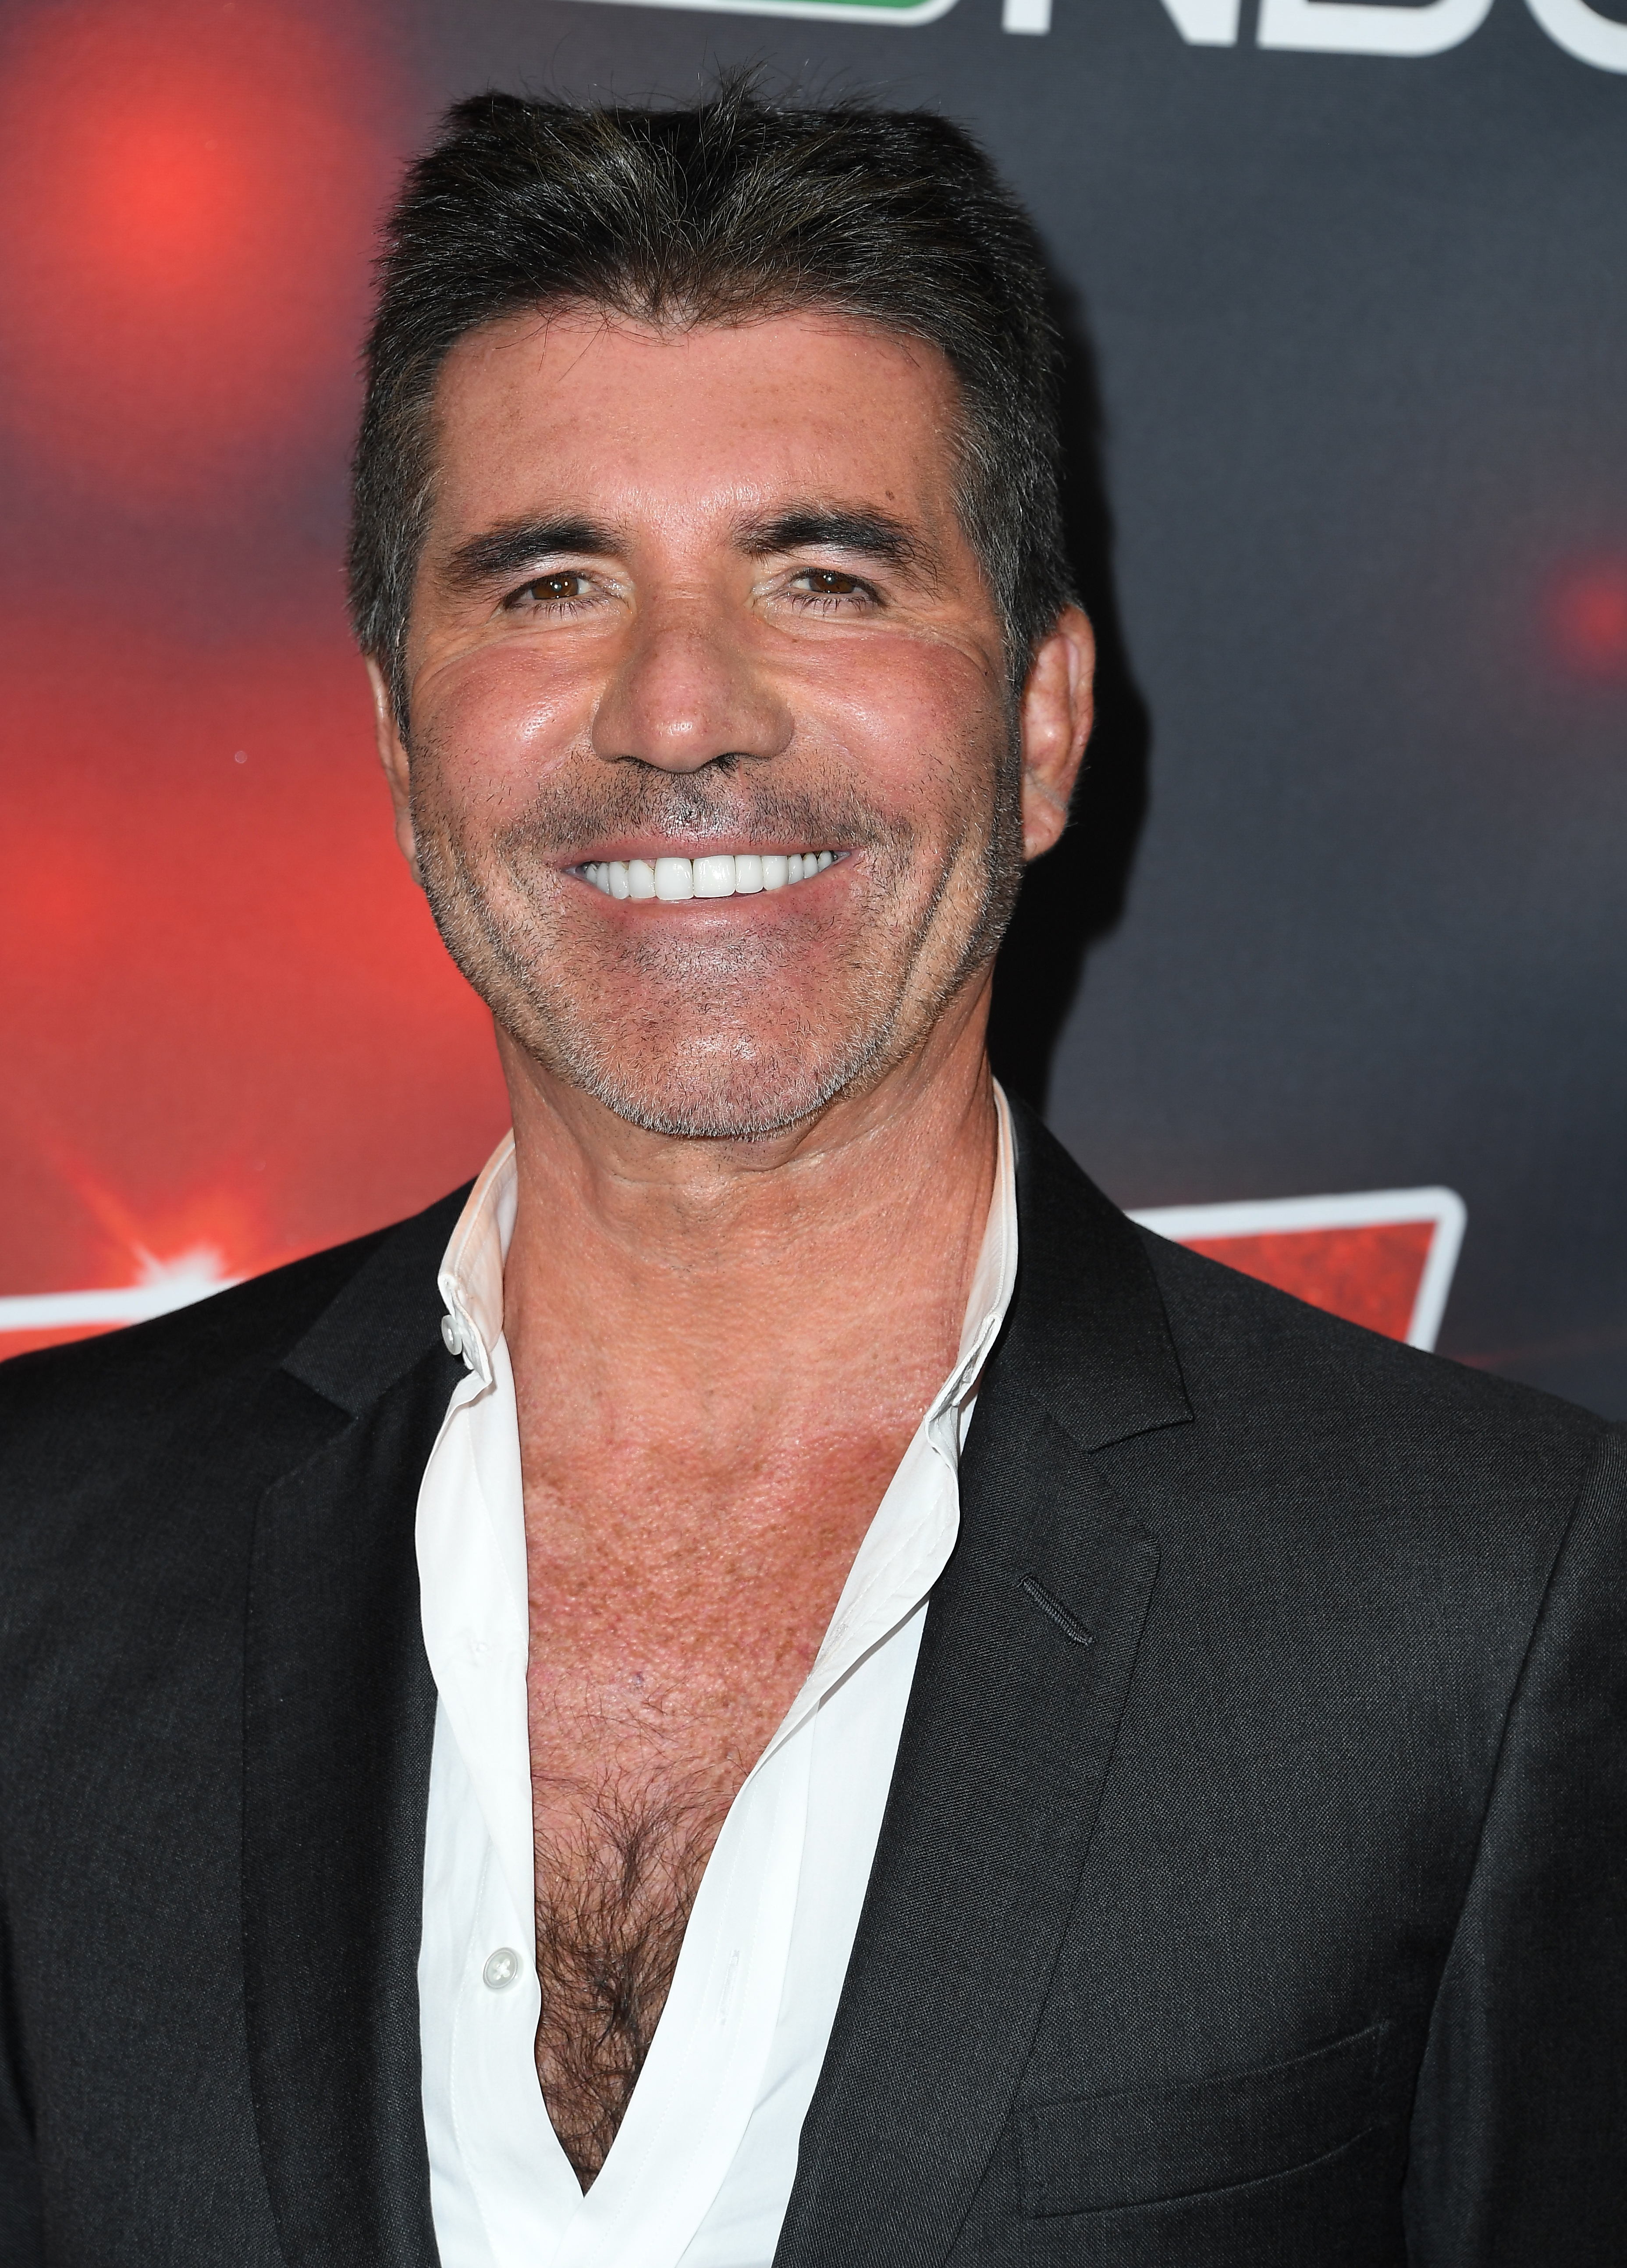 Simon Cowell at Dolby Theatre in California in 2021 | Source: Getty Images